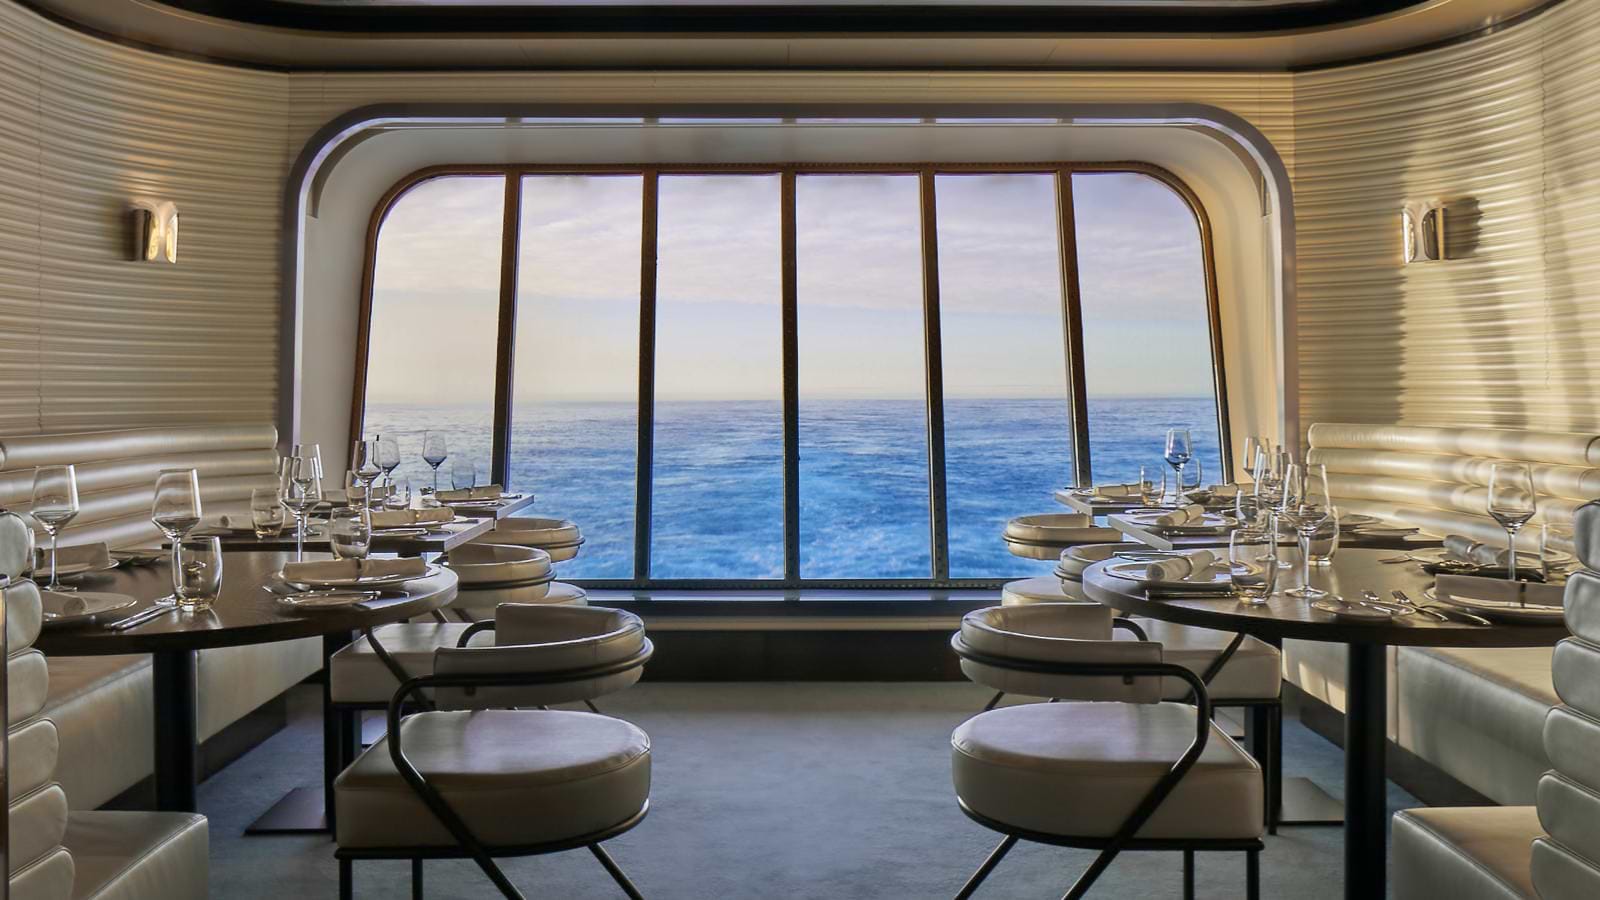 Tables and chairs at The Wake dining room aboard scarlet lady 